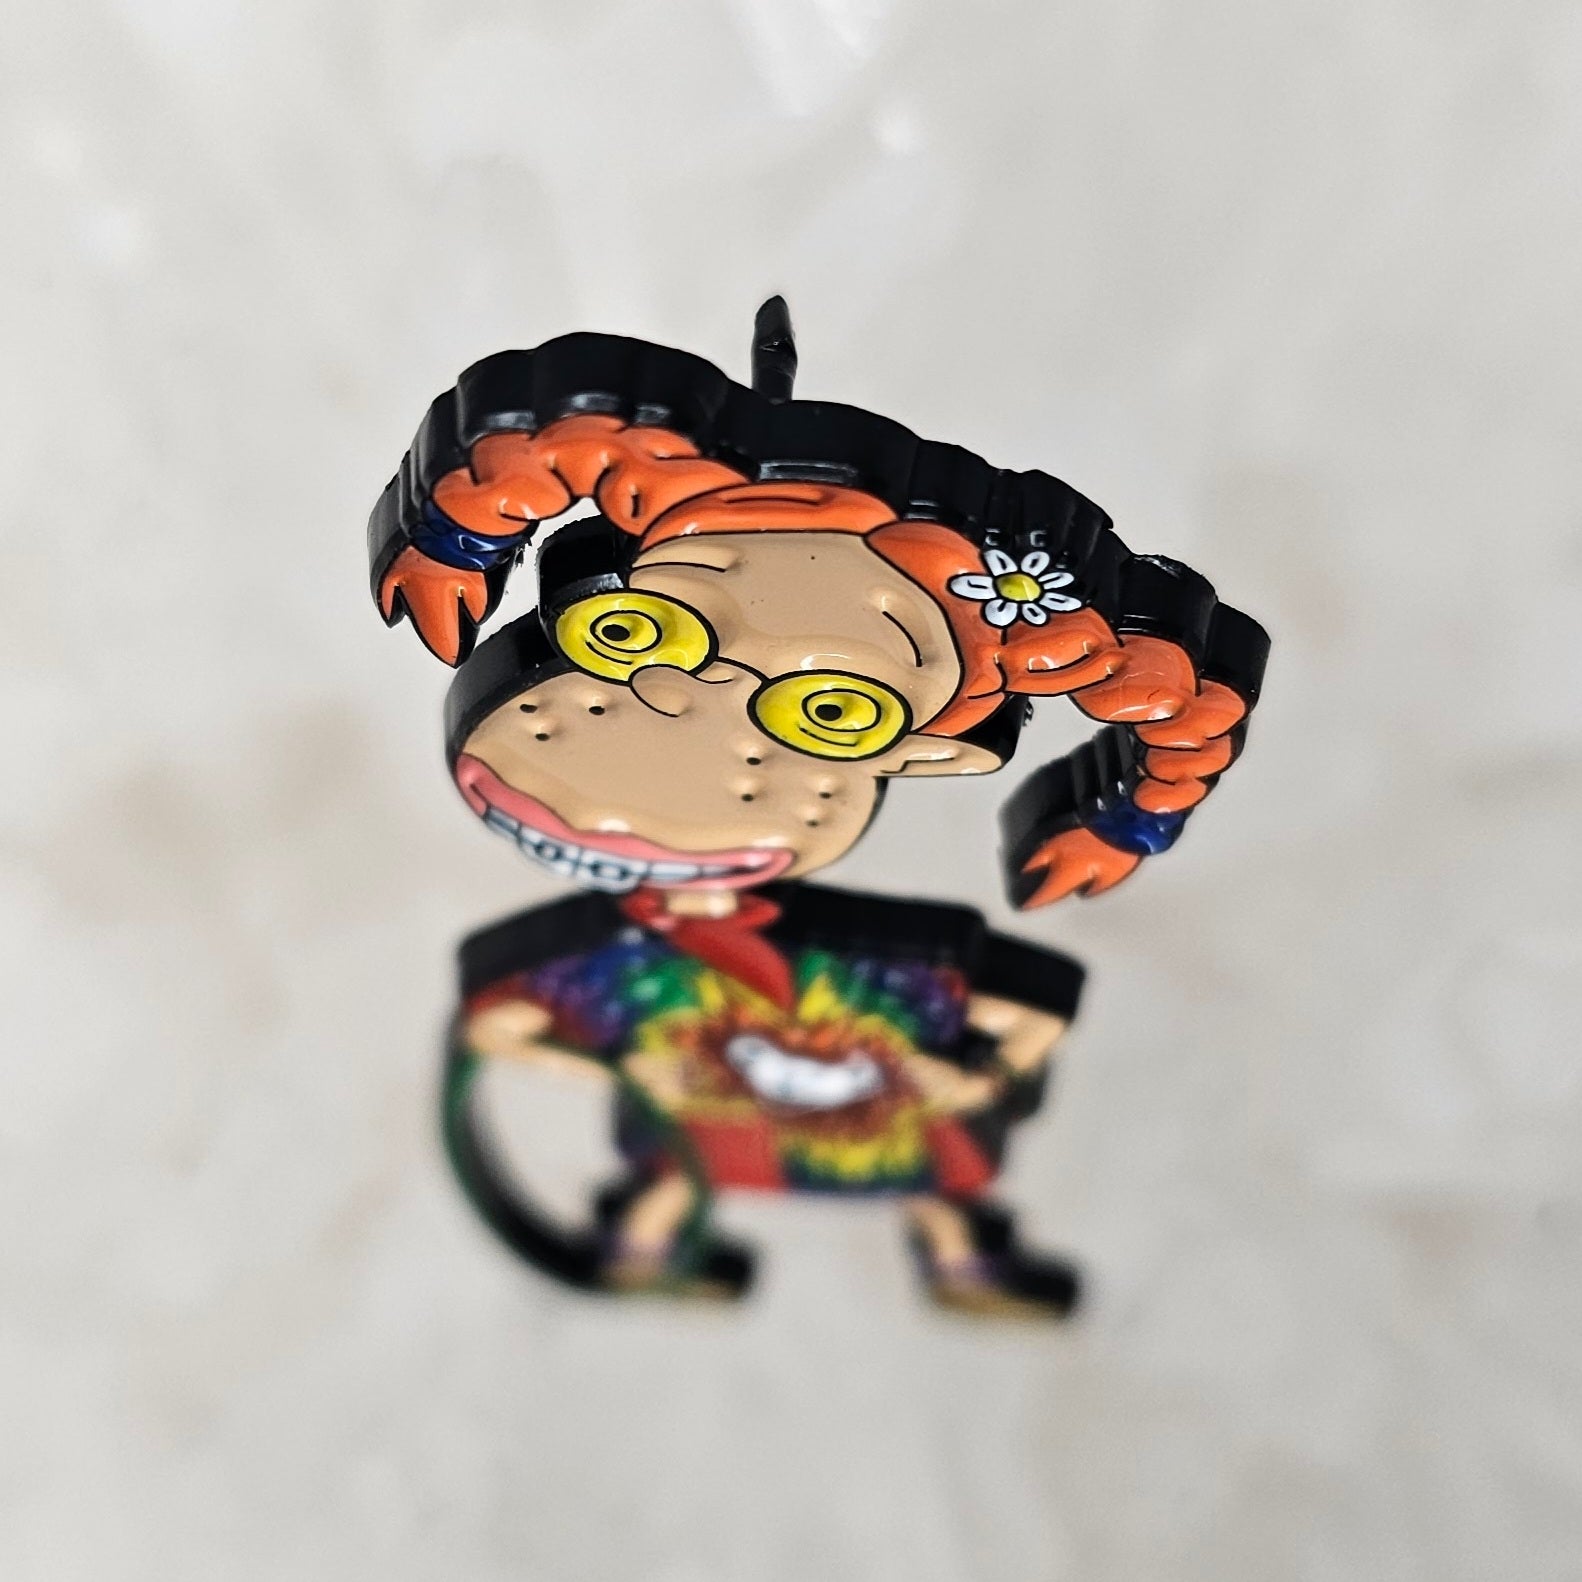 Epic face  Pin for Sale by braelyncollettt